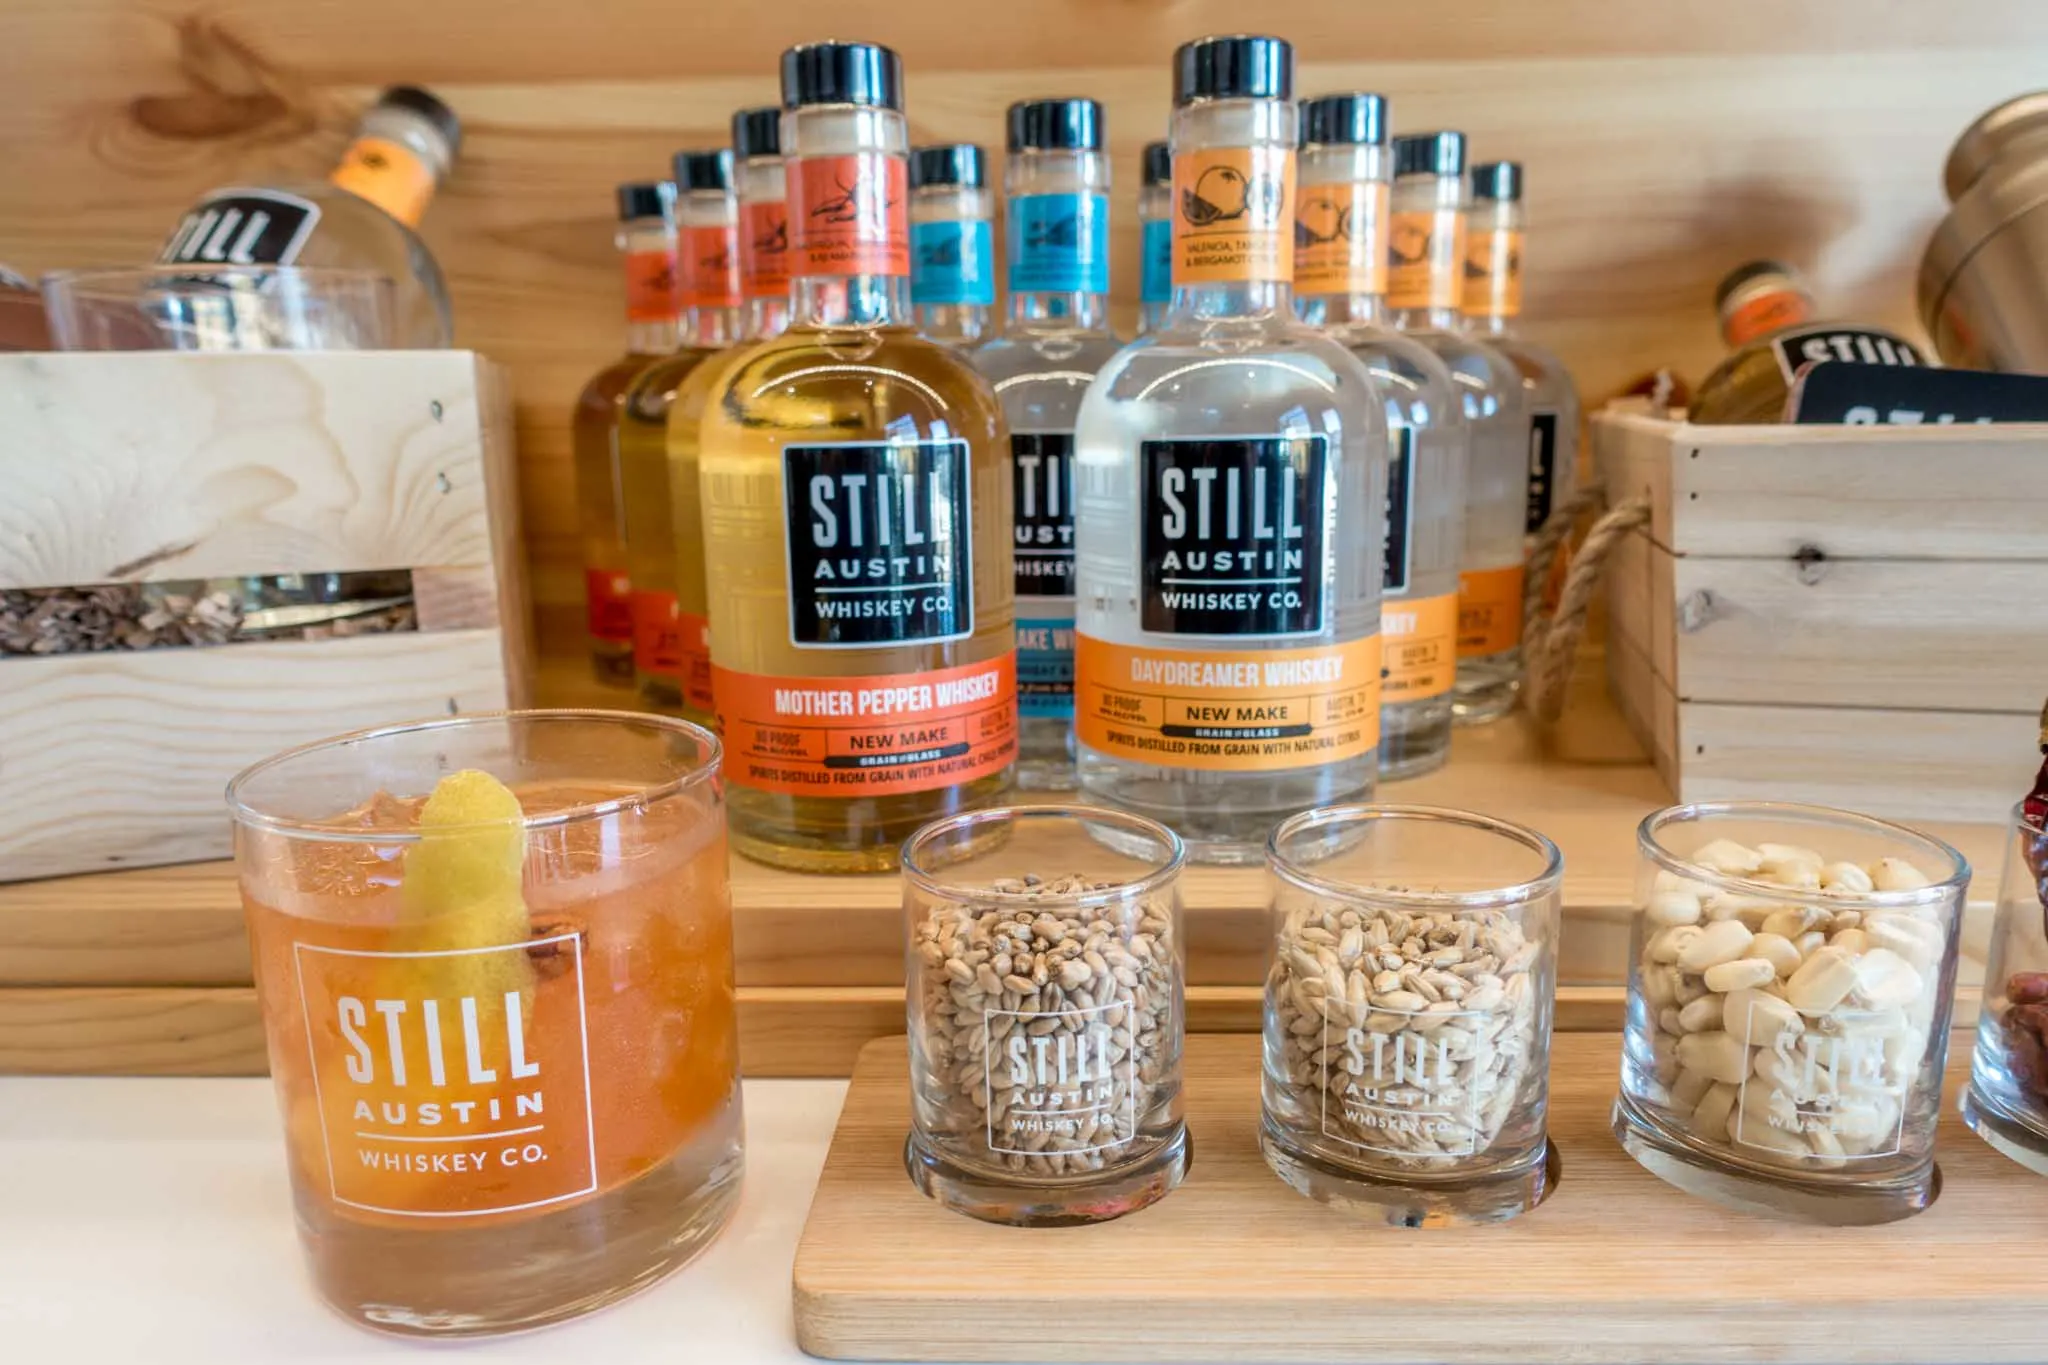 Bottles and cocktail glass labeled as Still Austin Whiskey Co.